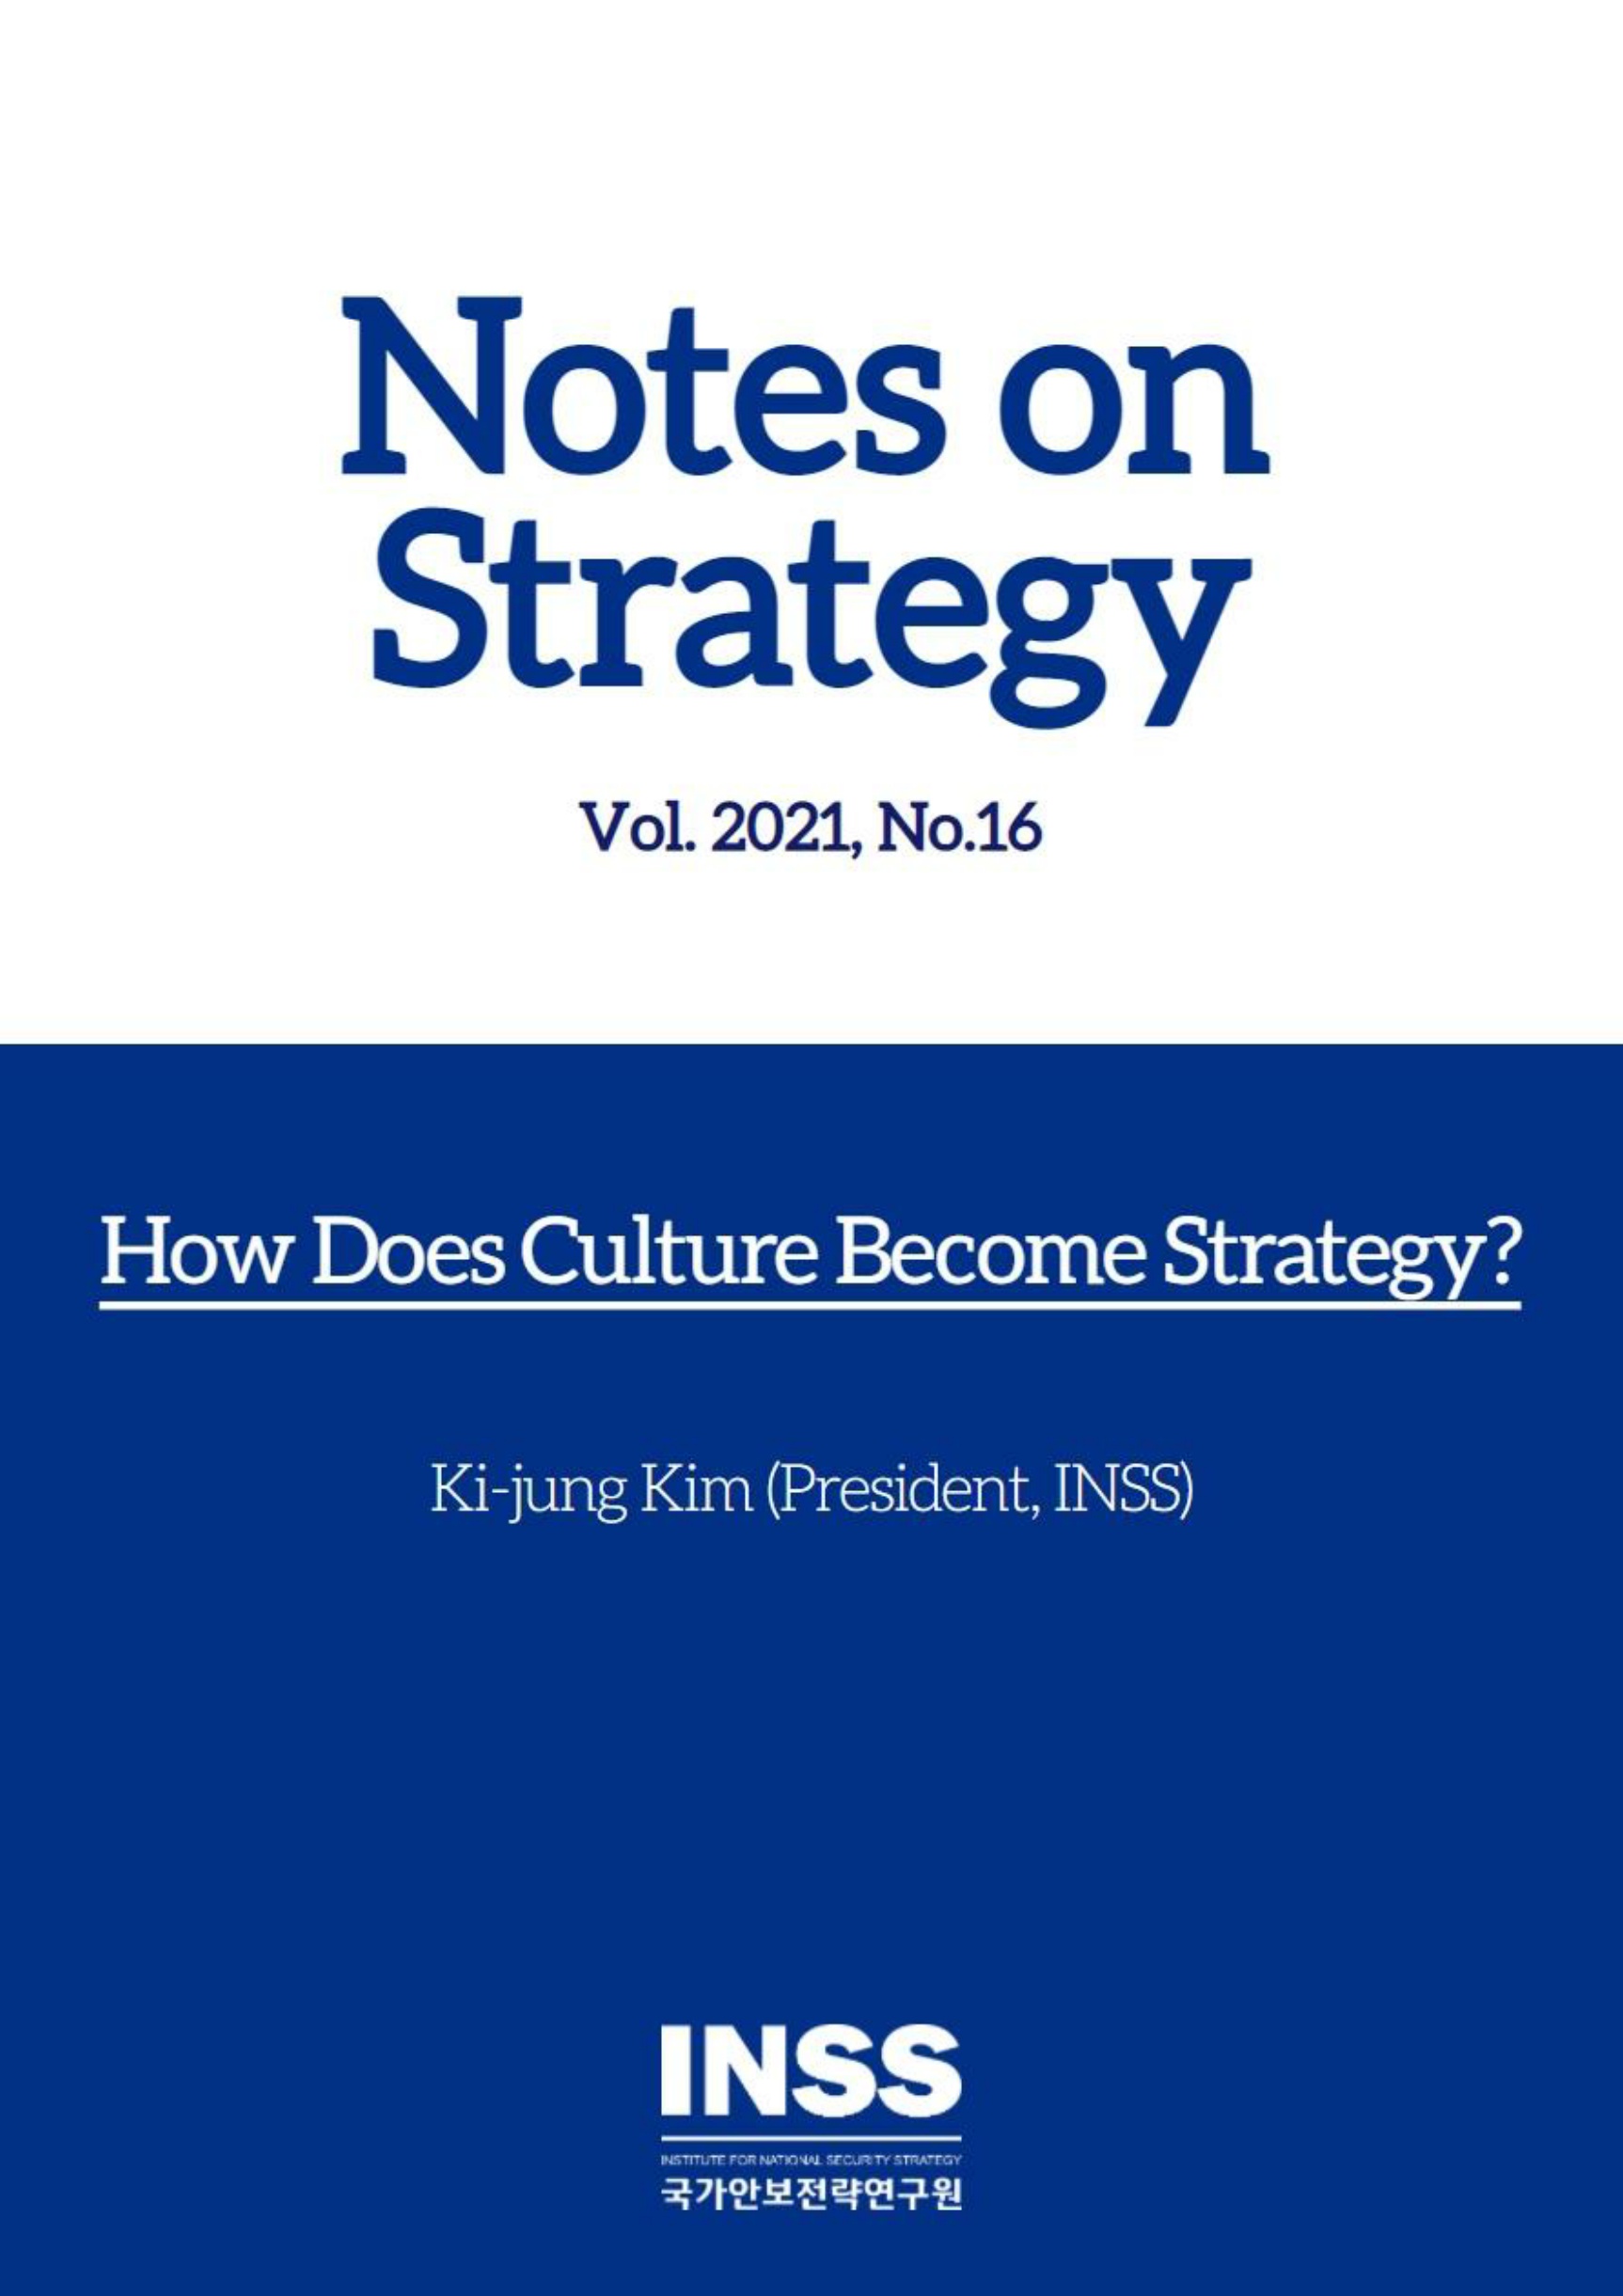 How Does Culture Become Strategy?